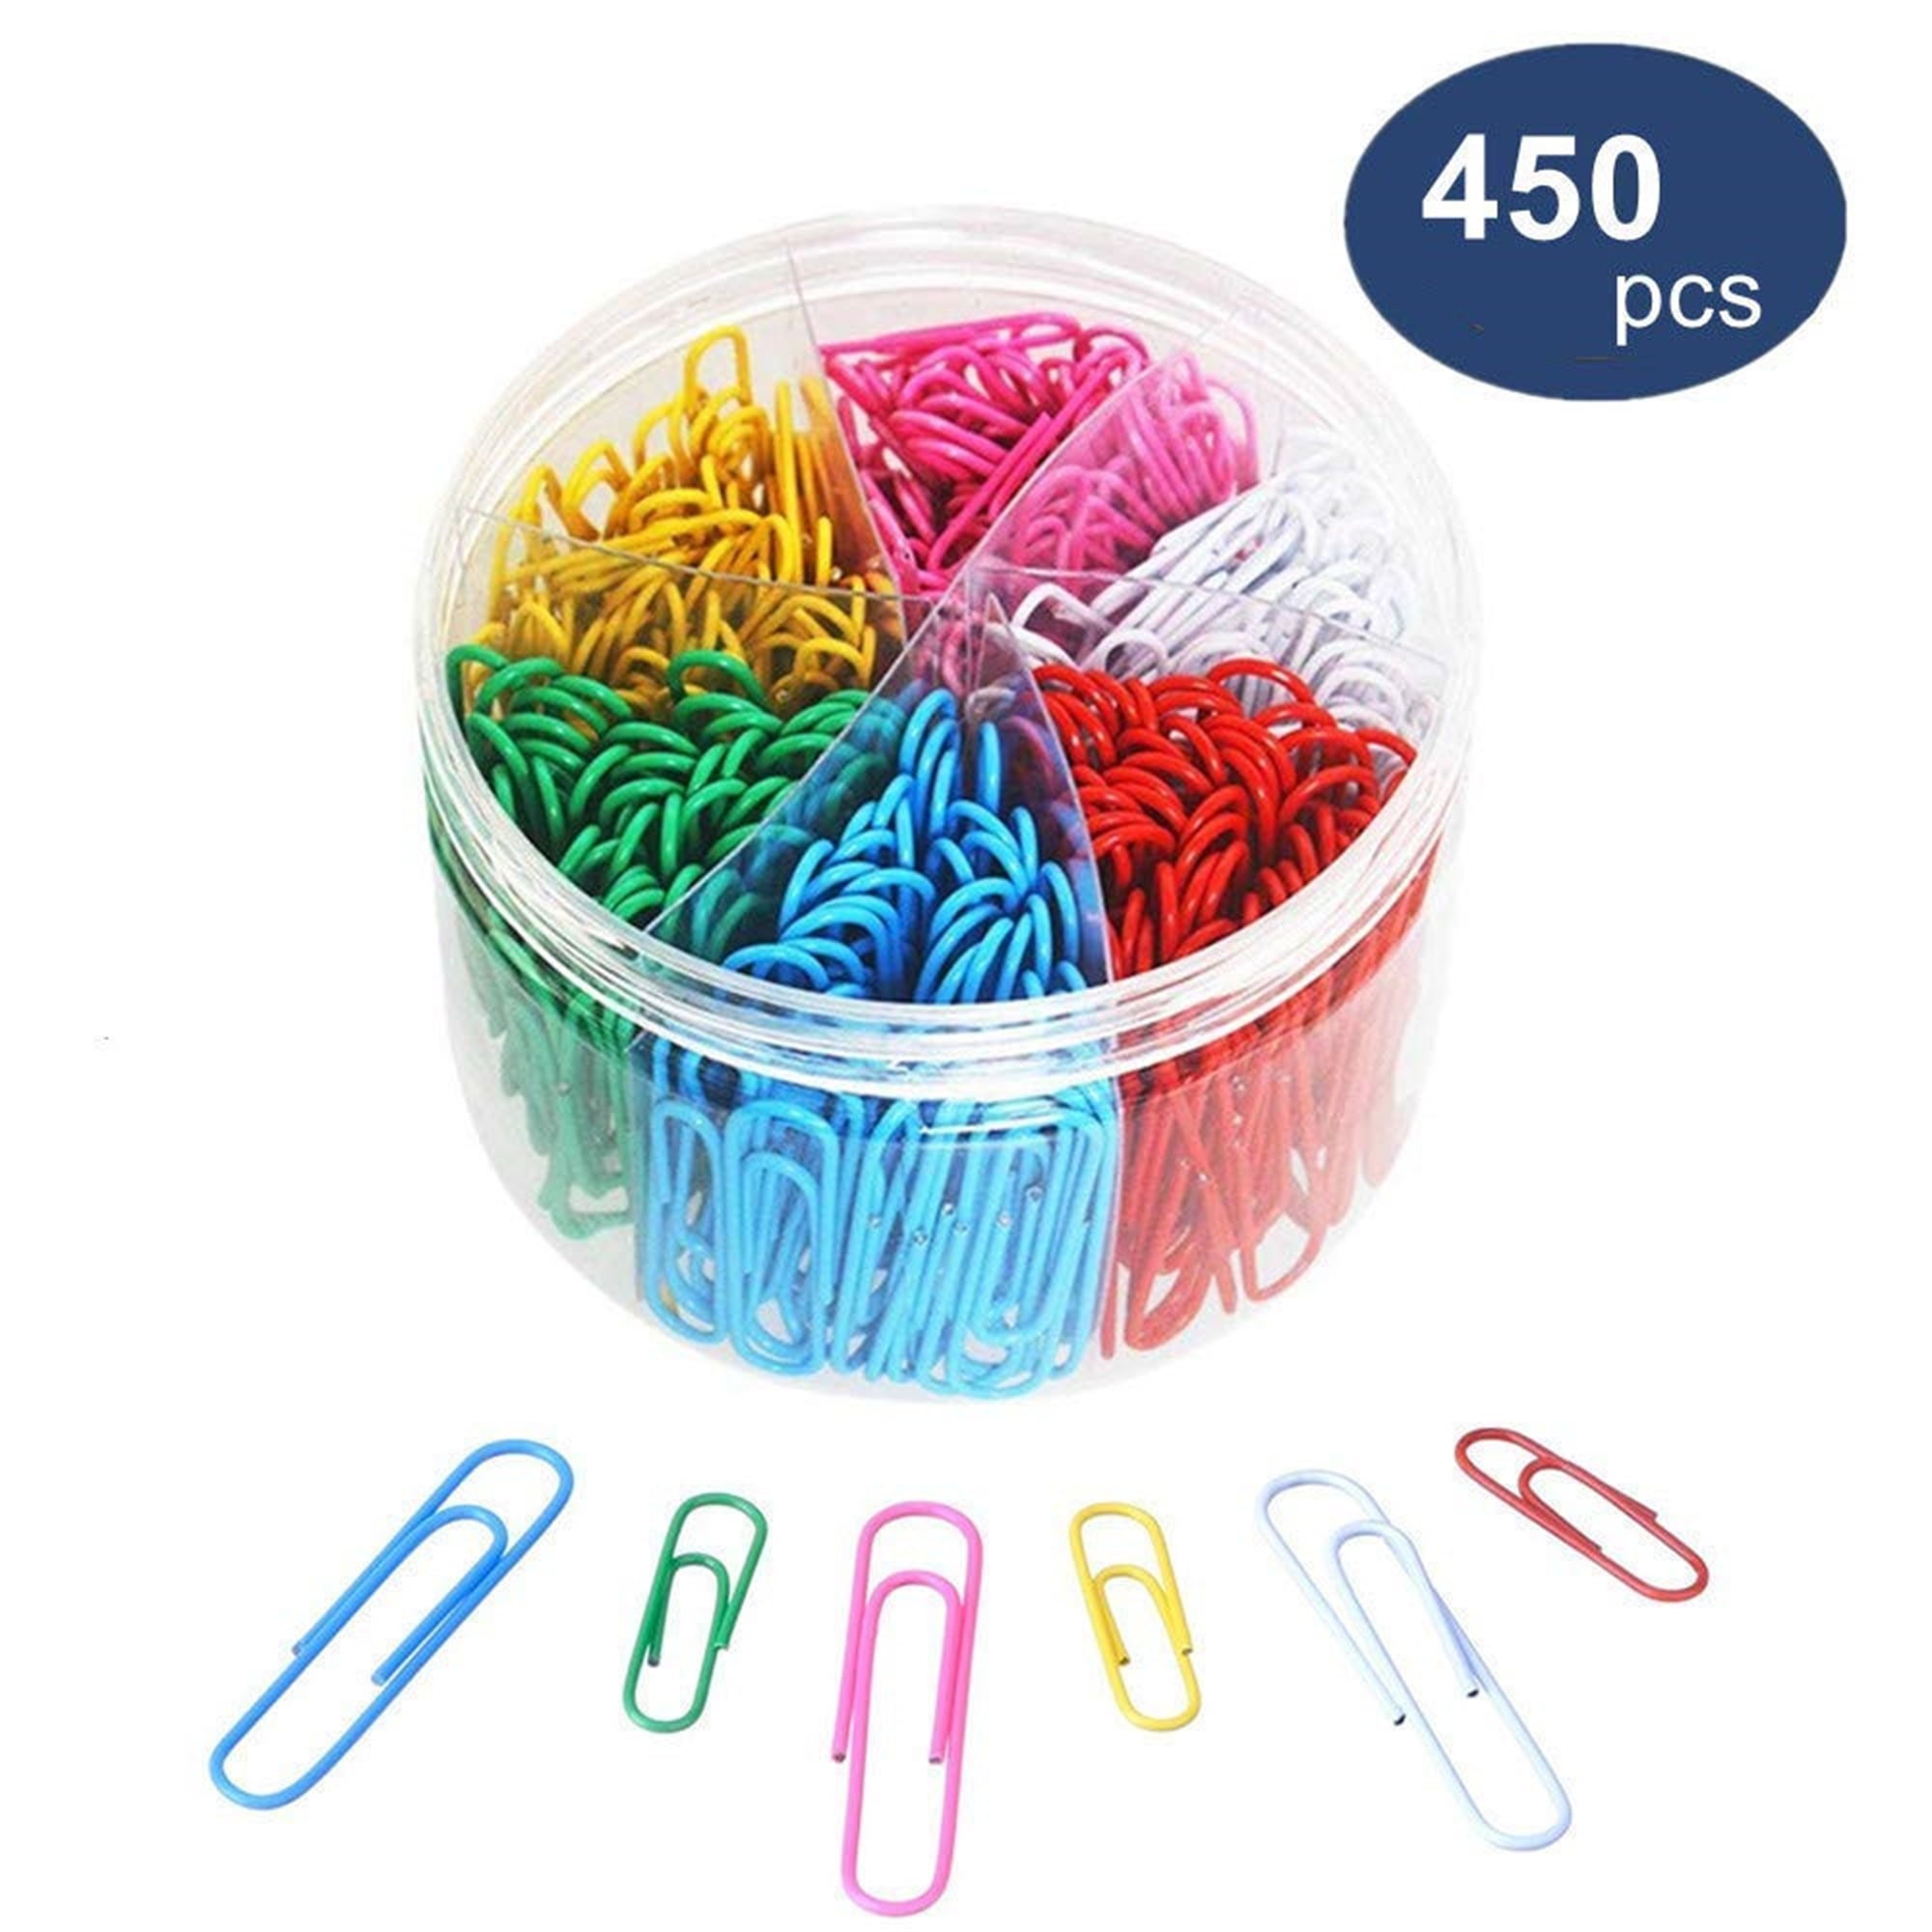 Paper Clips, 240pcs Medium Size Colored Paper Clip, PaperClips Assorted  Colors, Paper Clips for Paperwork Office School and Personal Use